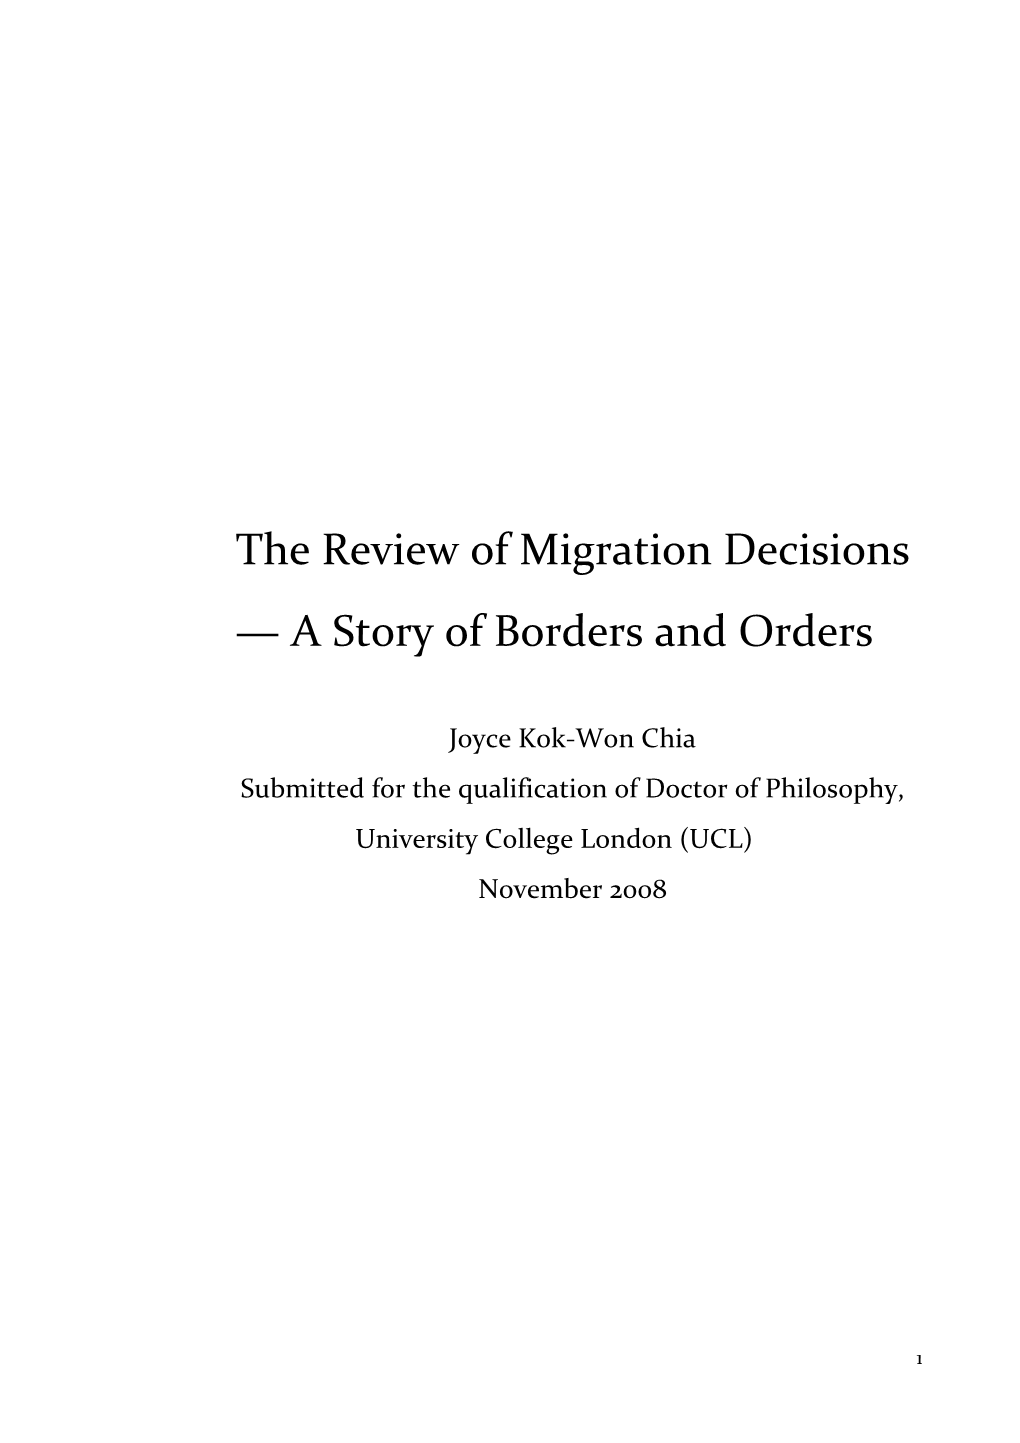 The Review of Migration Decisions — a Story of Borders and Orders